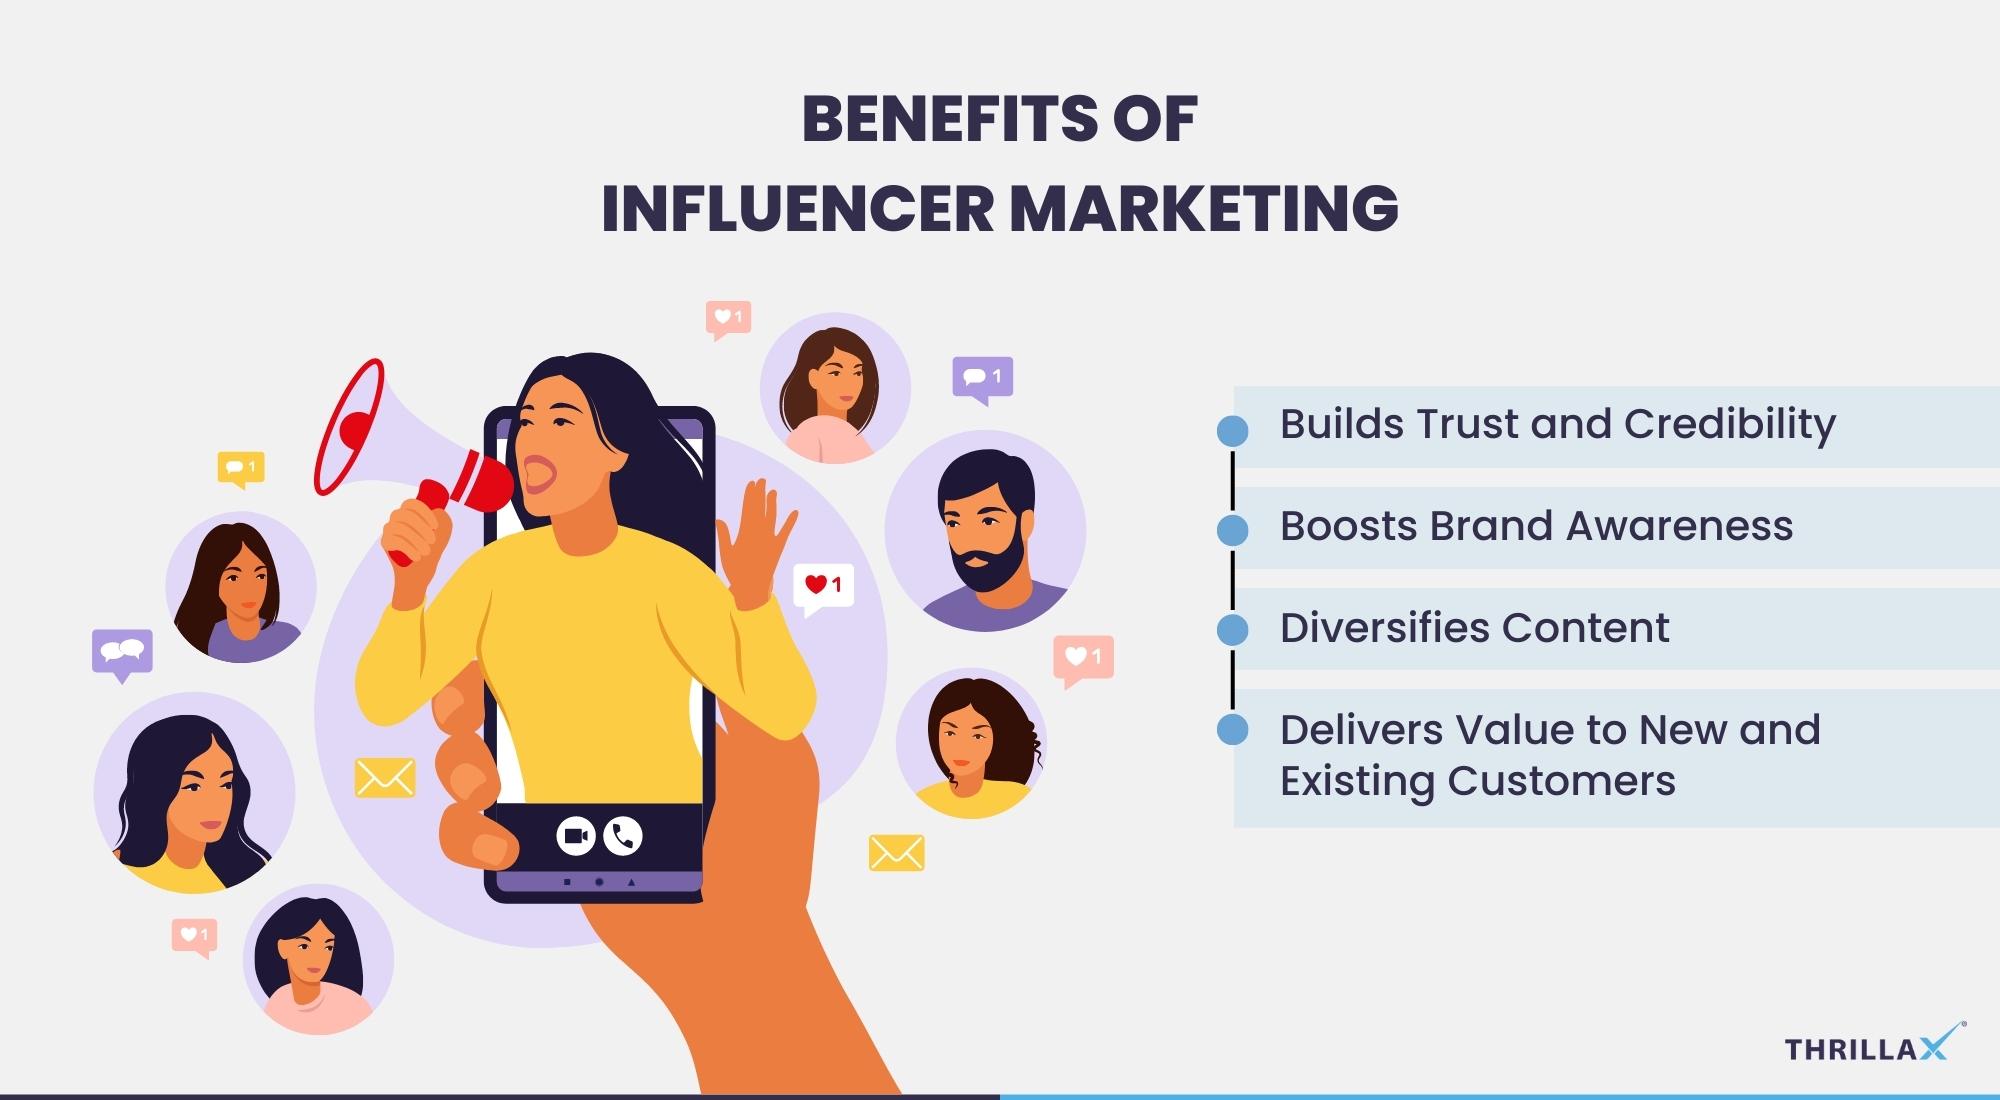 Partner with Influencers